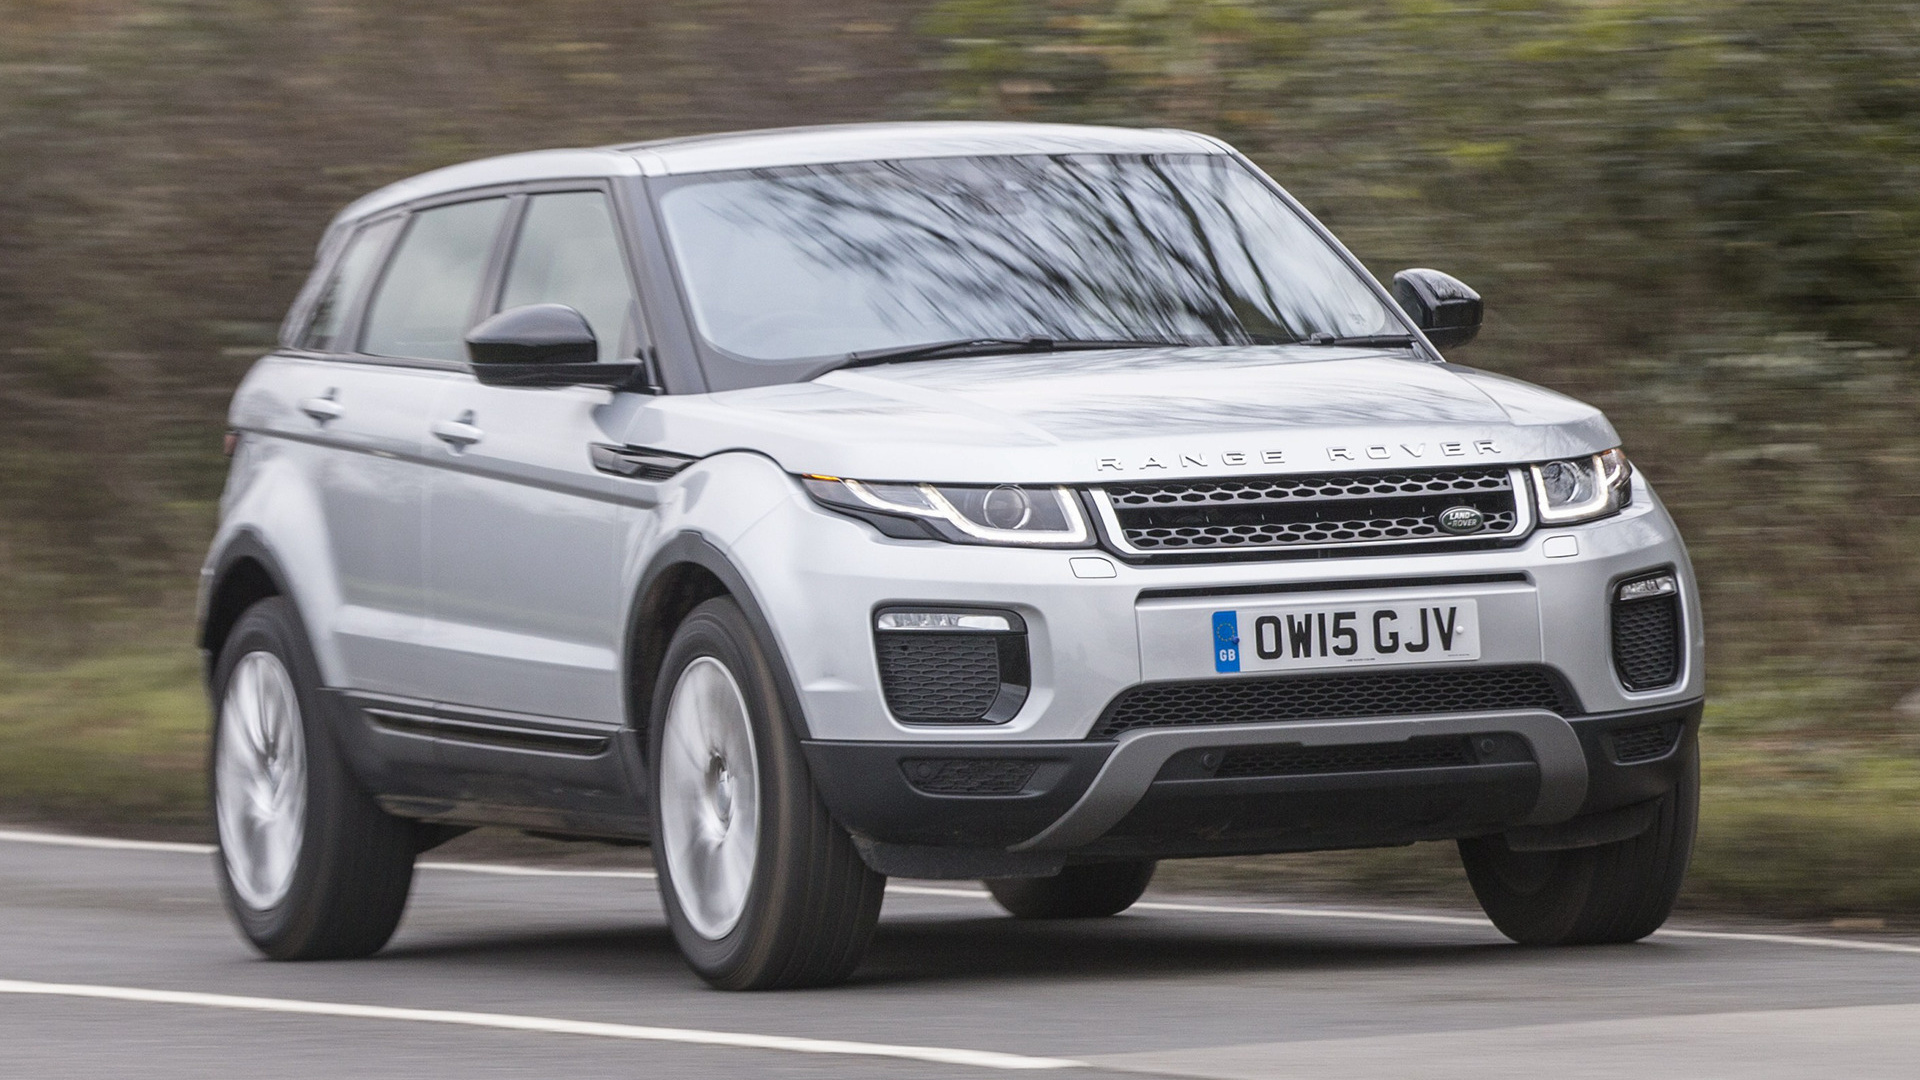 2015 Range Rover Evoque (UK) Wallpapers and HD Images